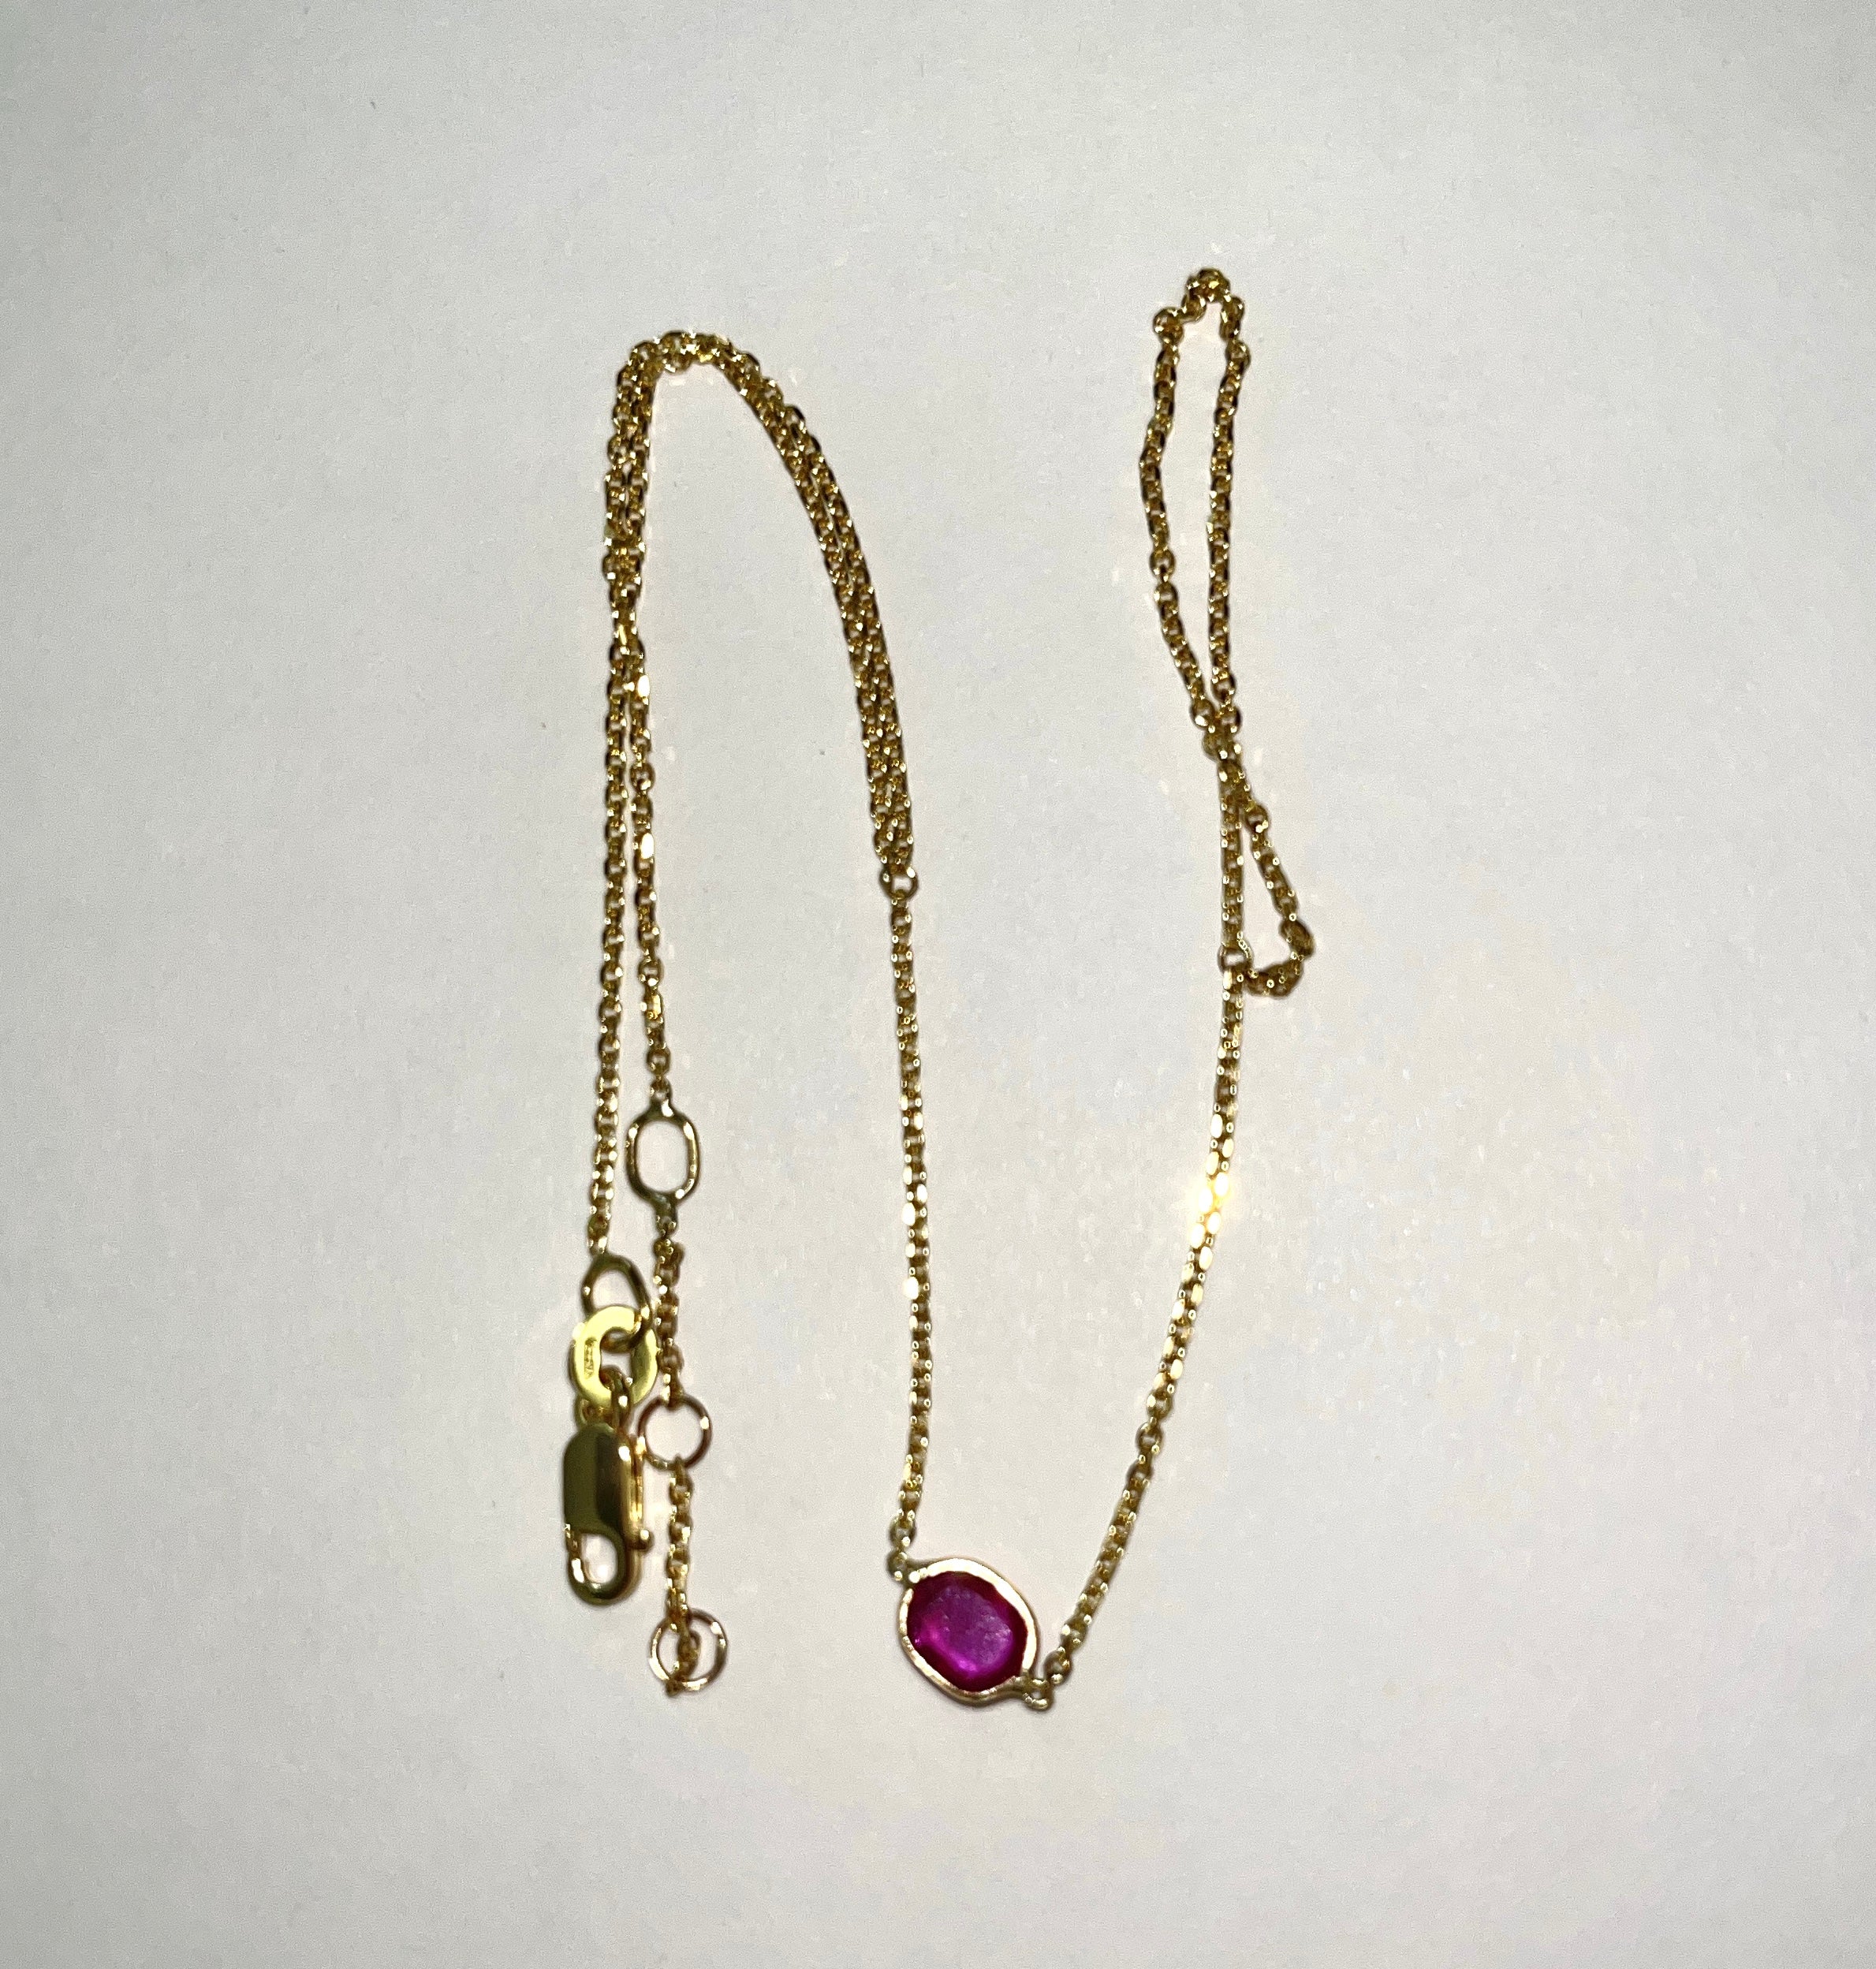 Oval Ruby Hand Chain Bracelet in Solid 14K Yellow Gold